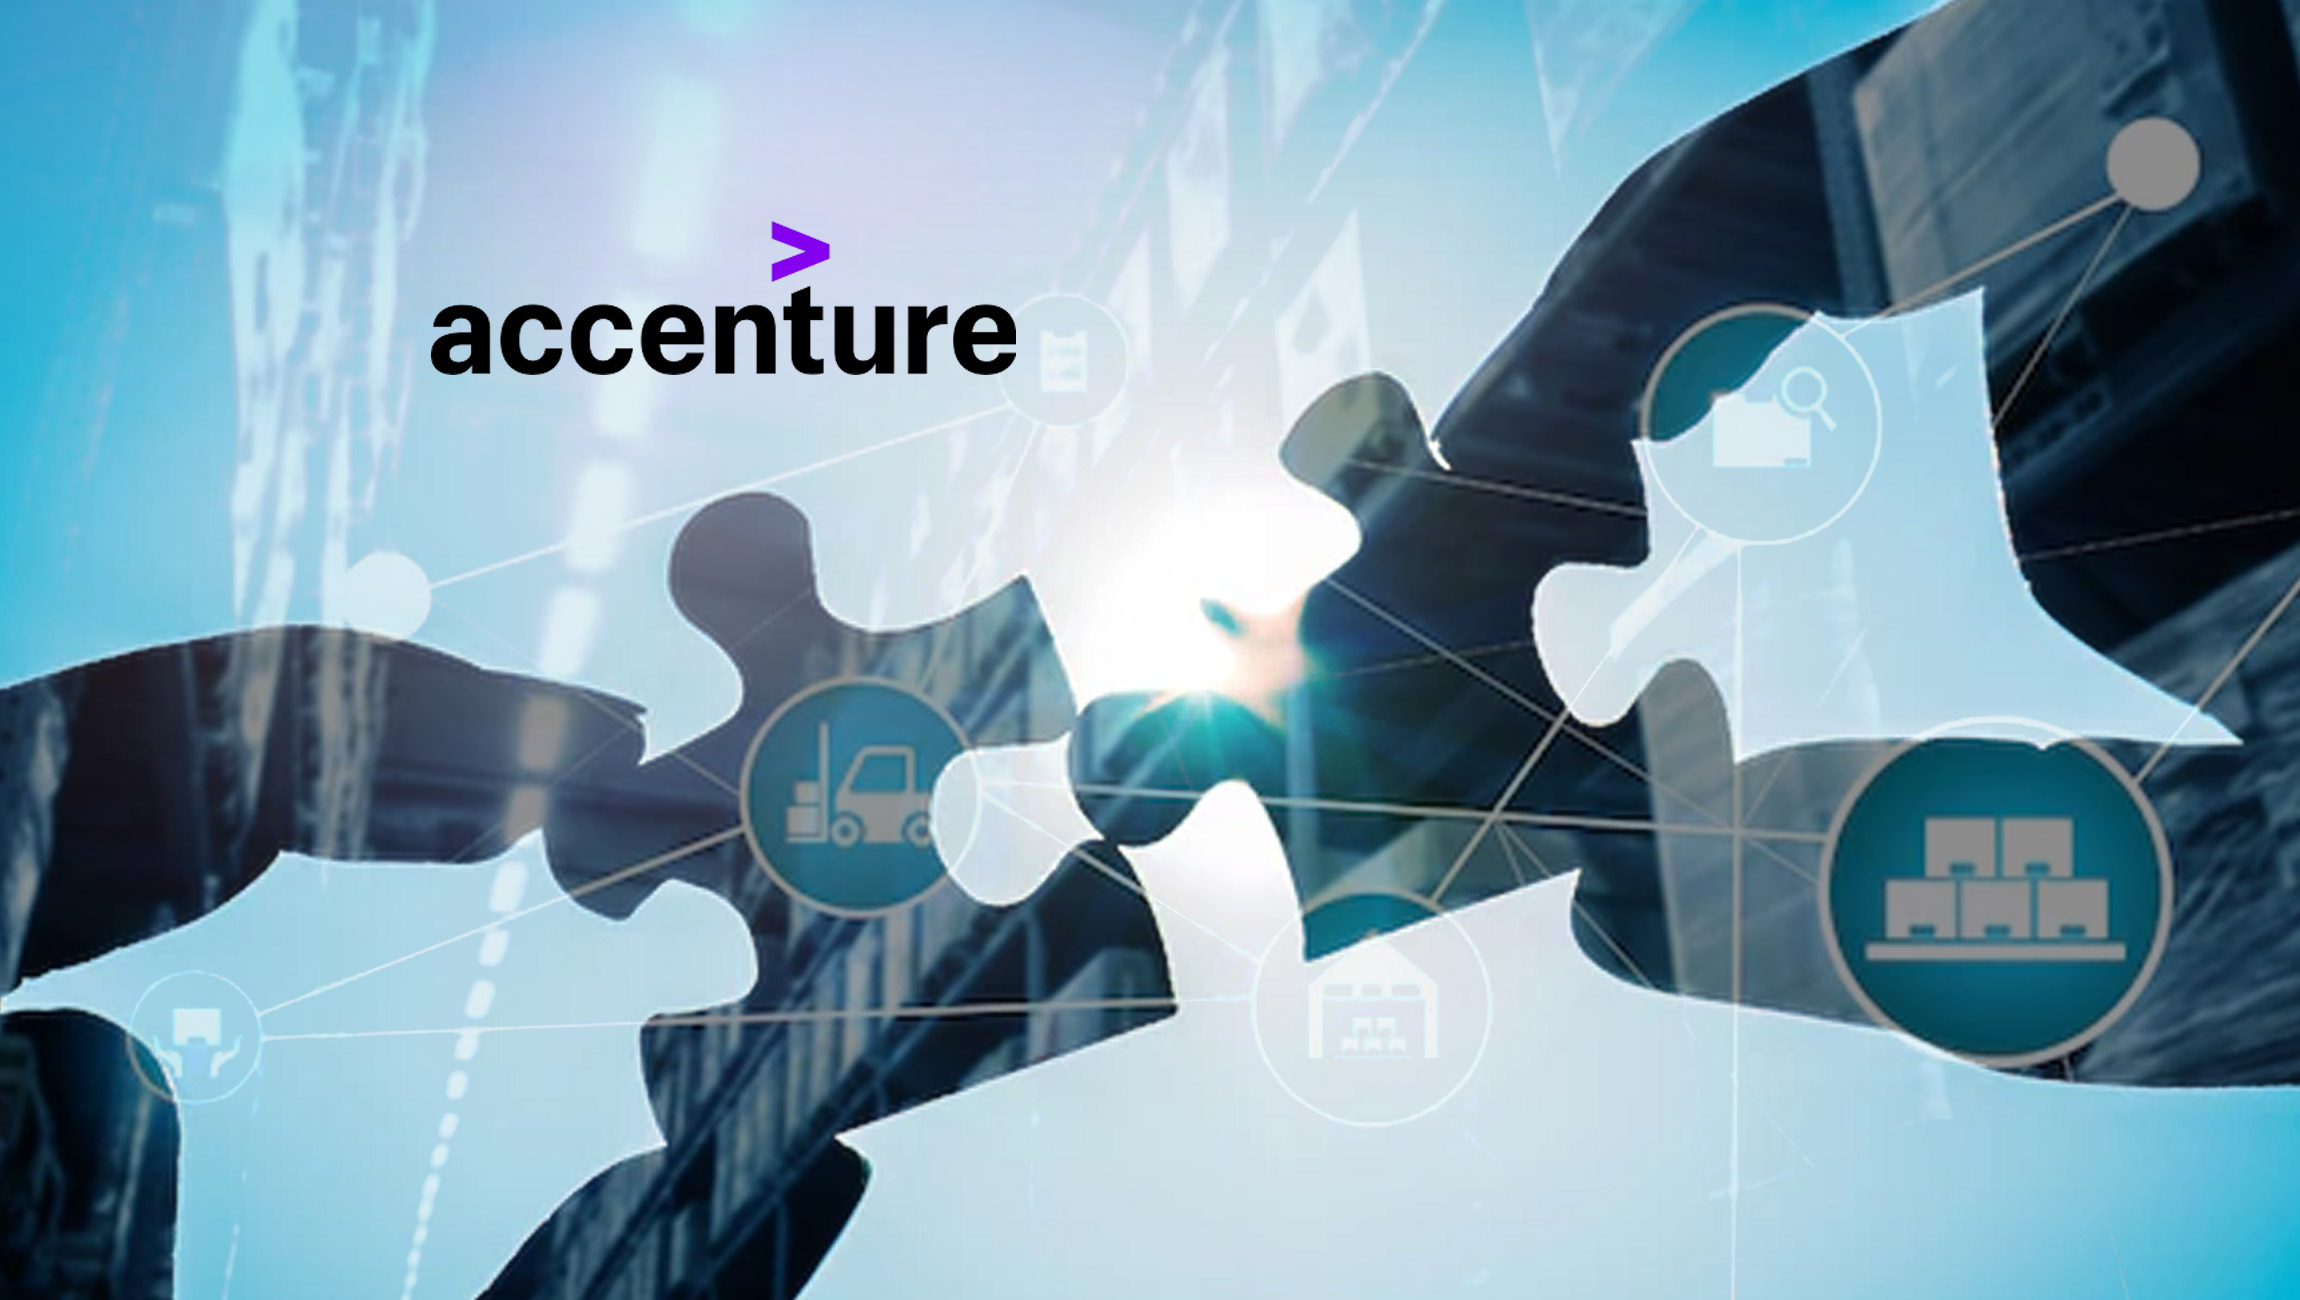 Accenture Completes Acquisition of Inspirage, Expanding Digital Supply Chain Capabilities